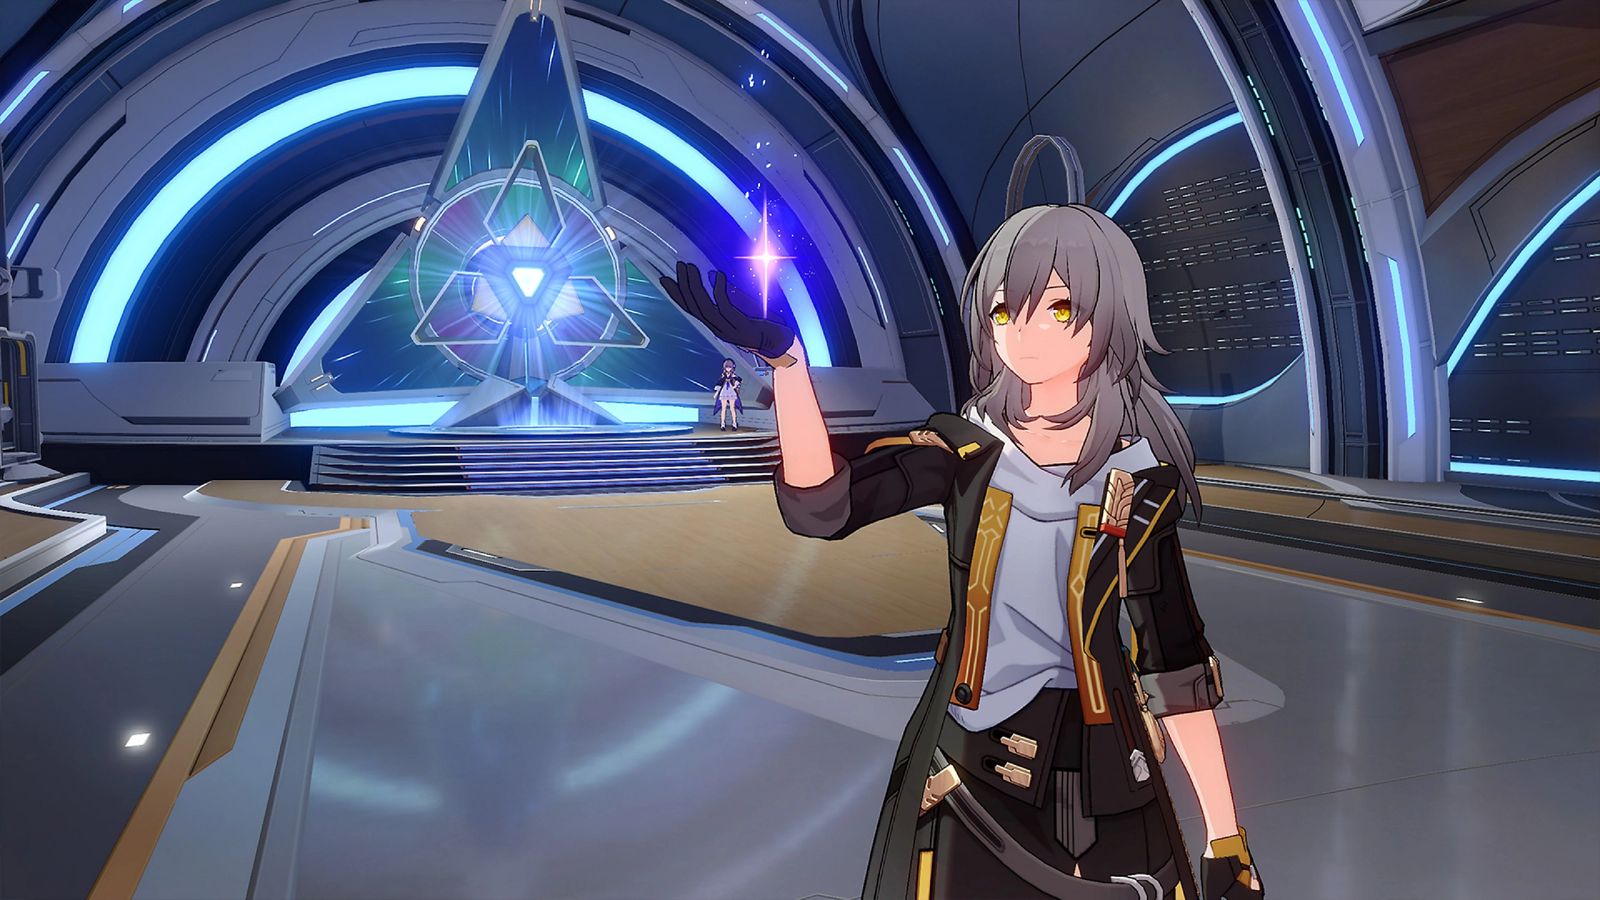 In-game image from Honkai: Star Rail of a grey haired character in a Sci-Fi setting with a purple star floating in their hand.